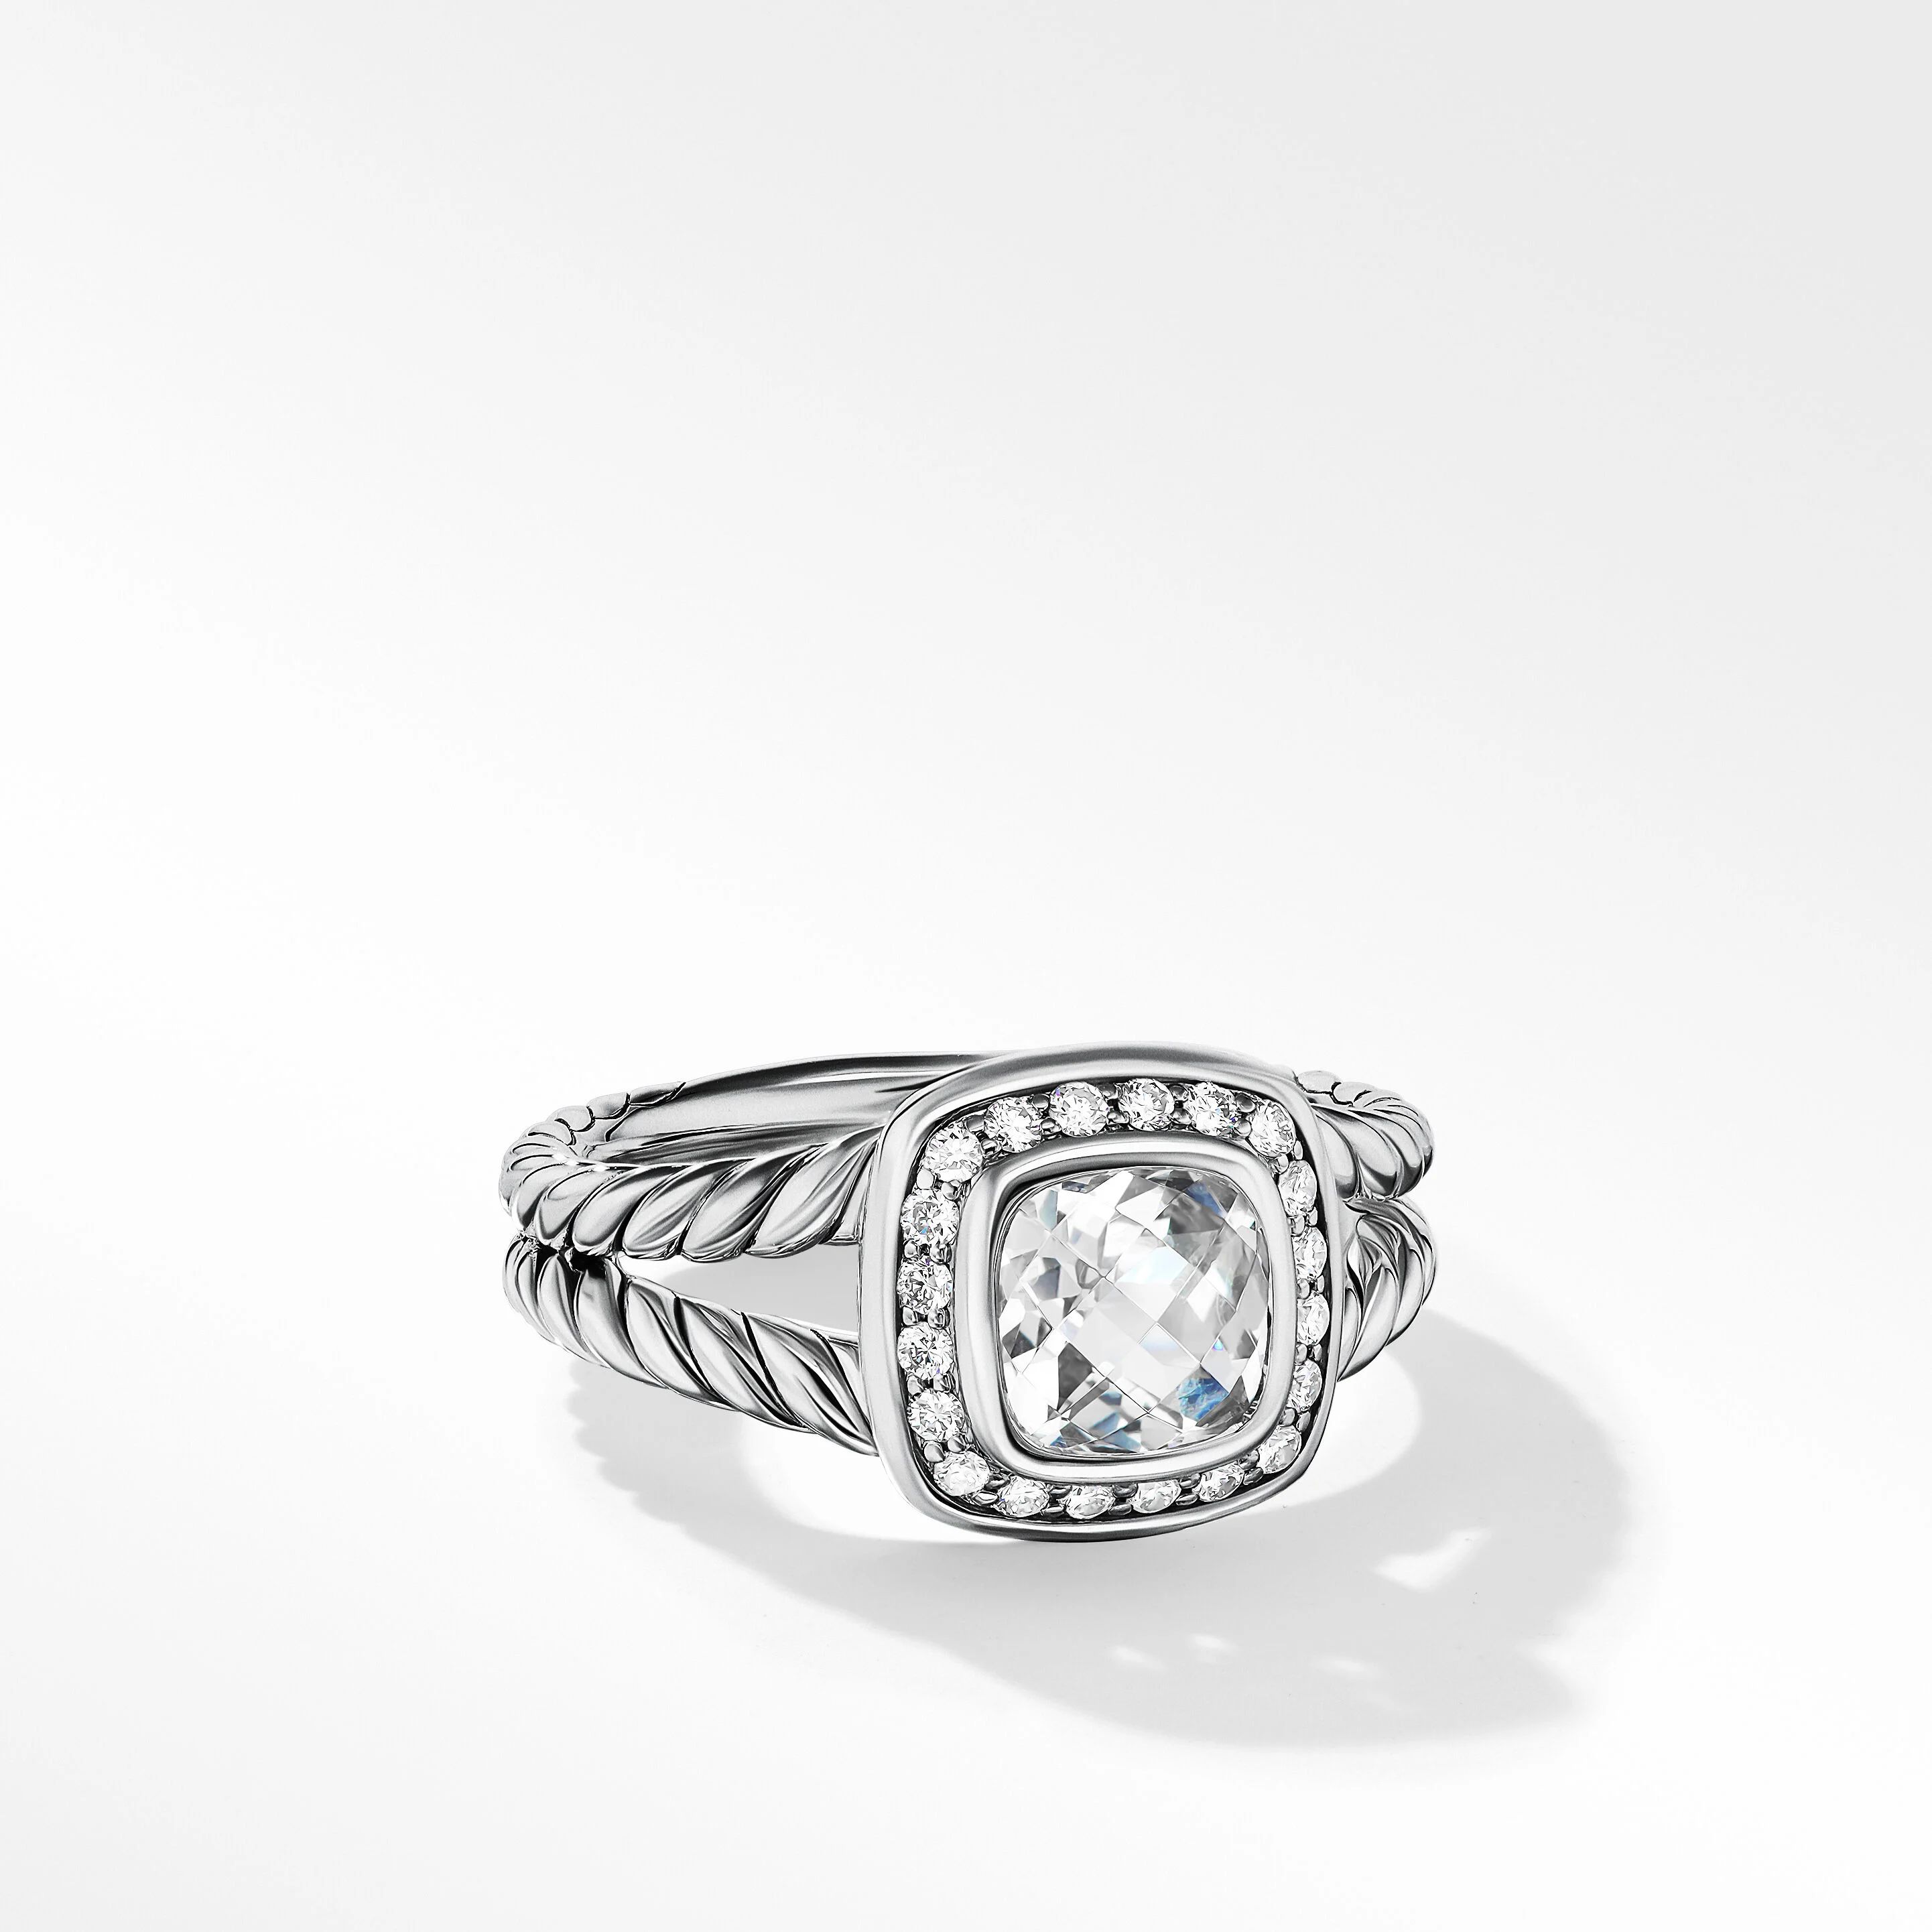 Petite Albion® Ring in Sterling Silver with White Topaz and Pavé Diamonds | David Yurman